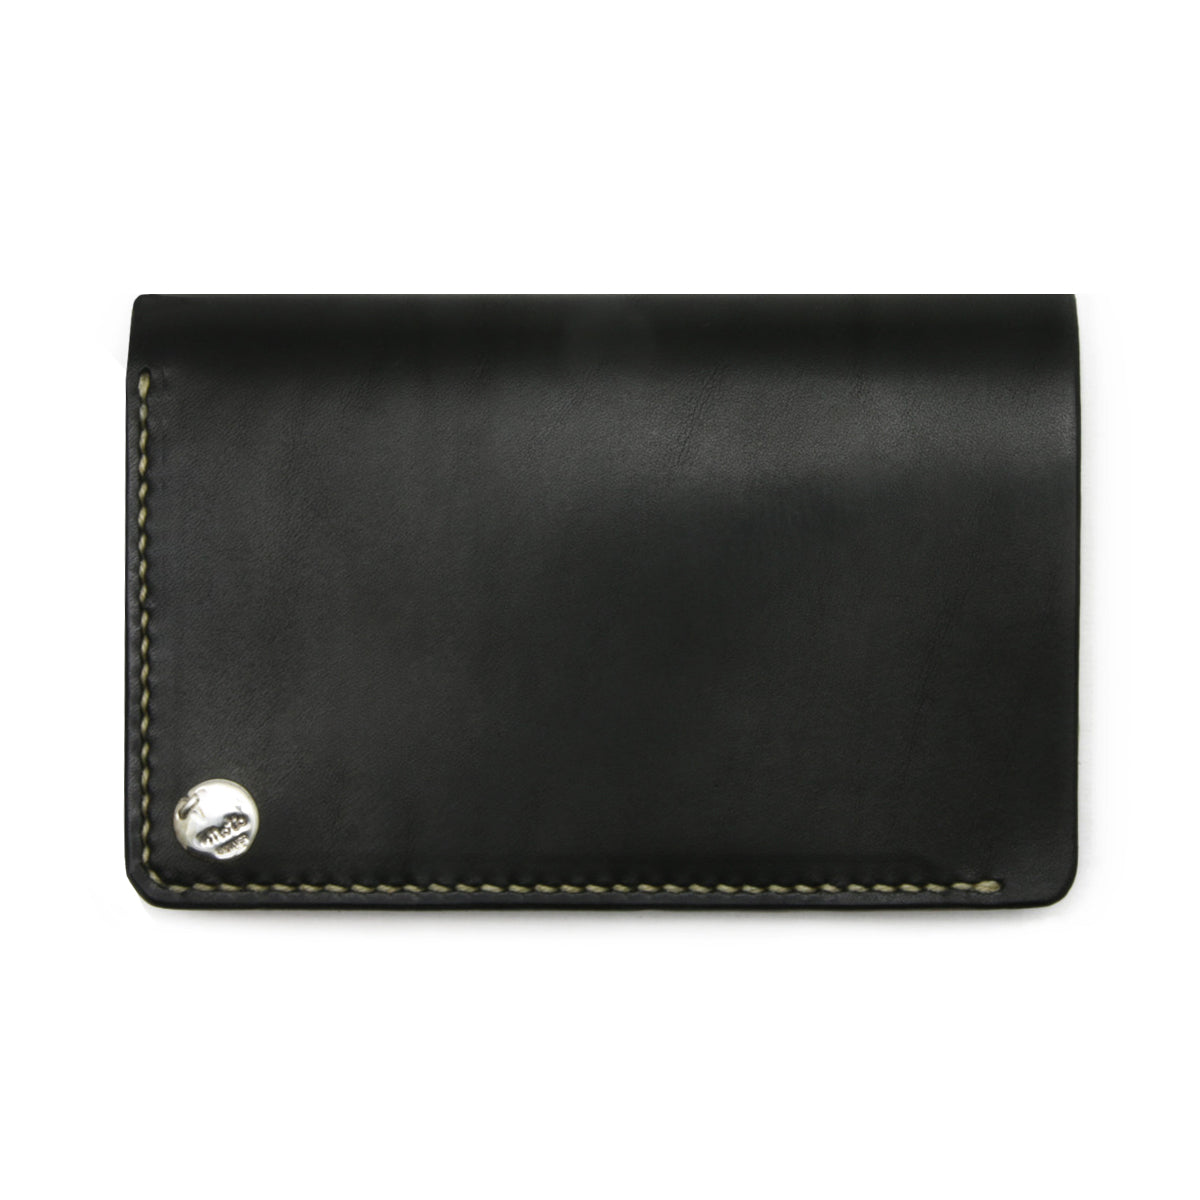 W2 MIDDLE WALLET / ミドルウォレット – MOTO ONLINE STORE